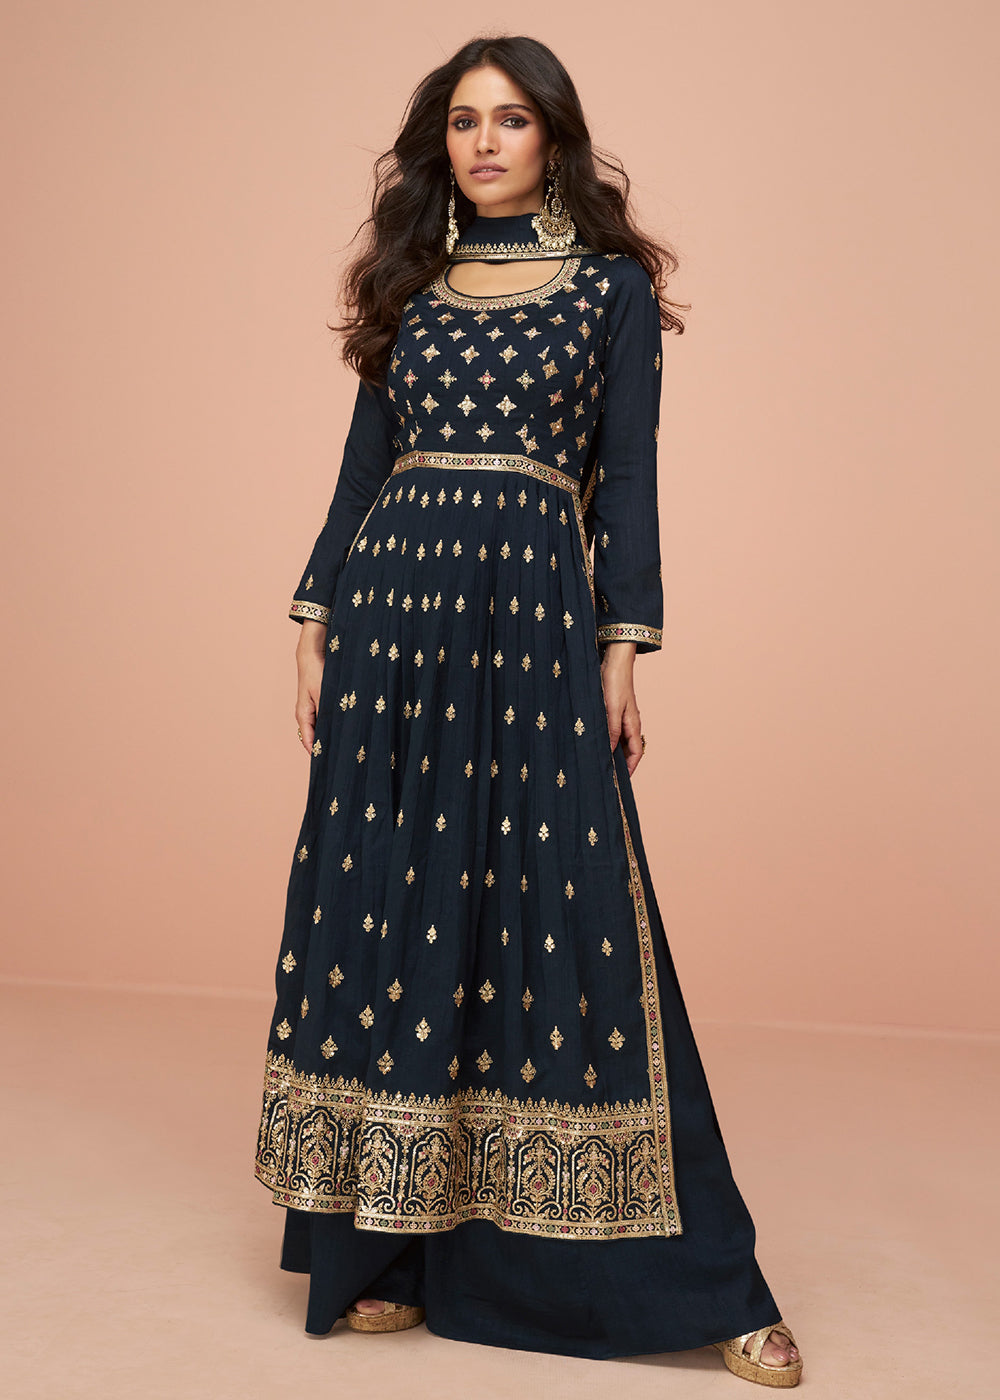 Buy Now Midnight Blue Wedding Wear Silk Trendy Palazzo Suit Online in USA, UK, Canada, Germany, Australia & Worldwide at Empress Clothing.